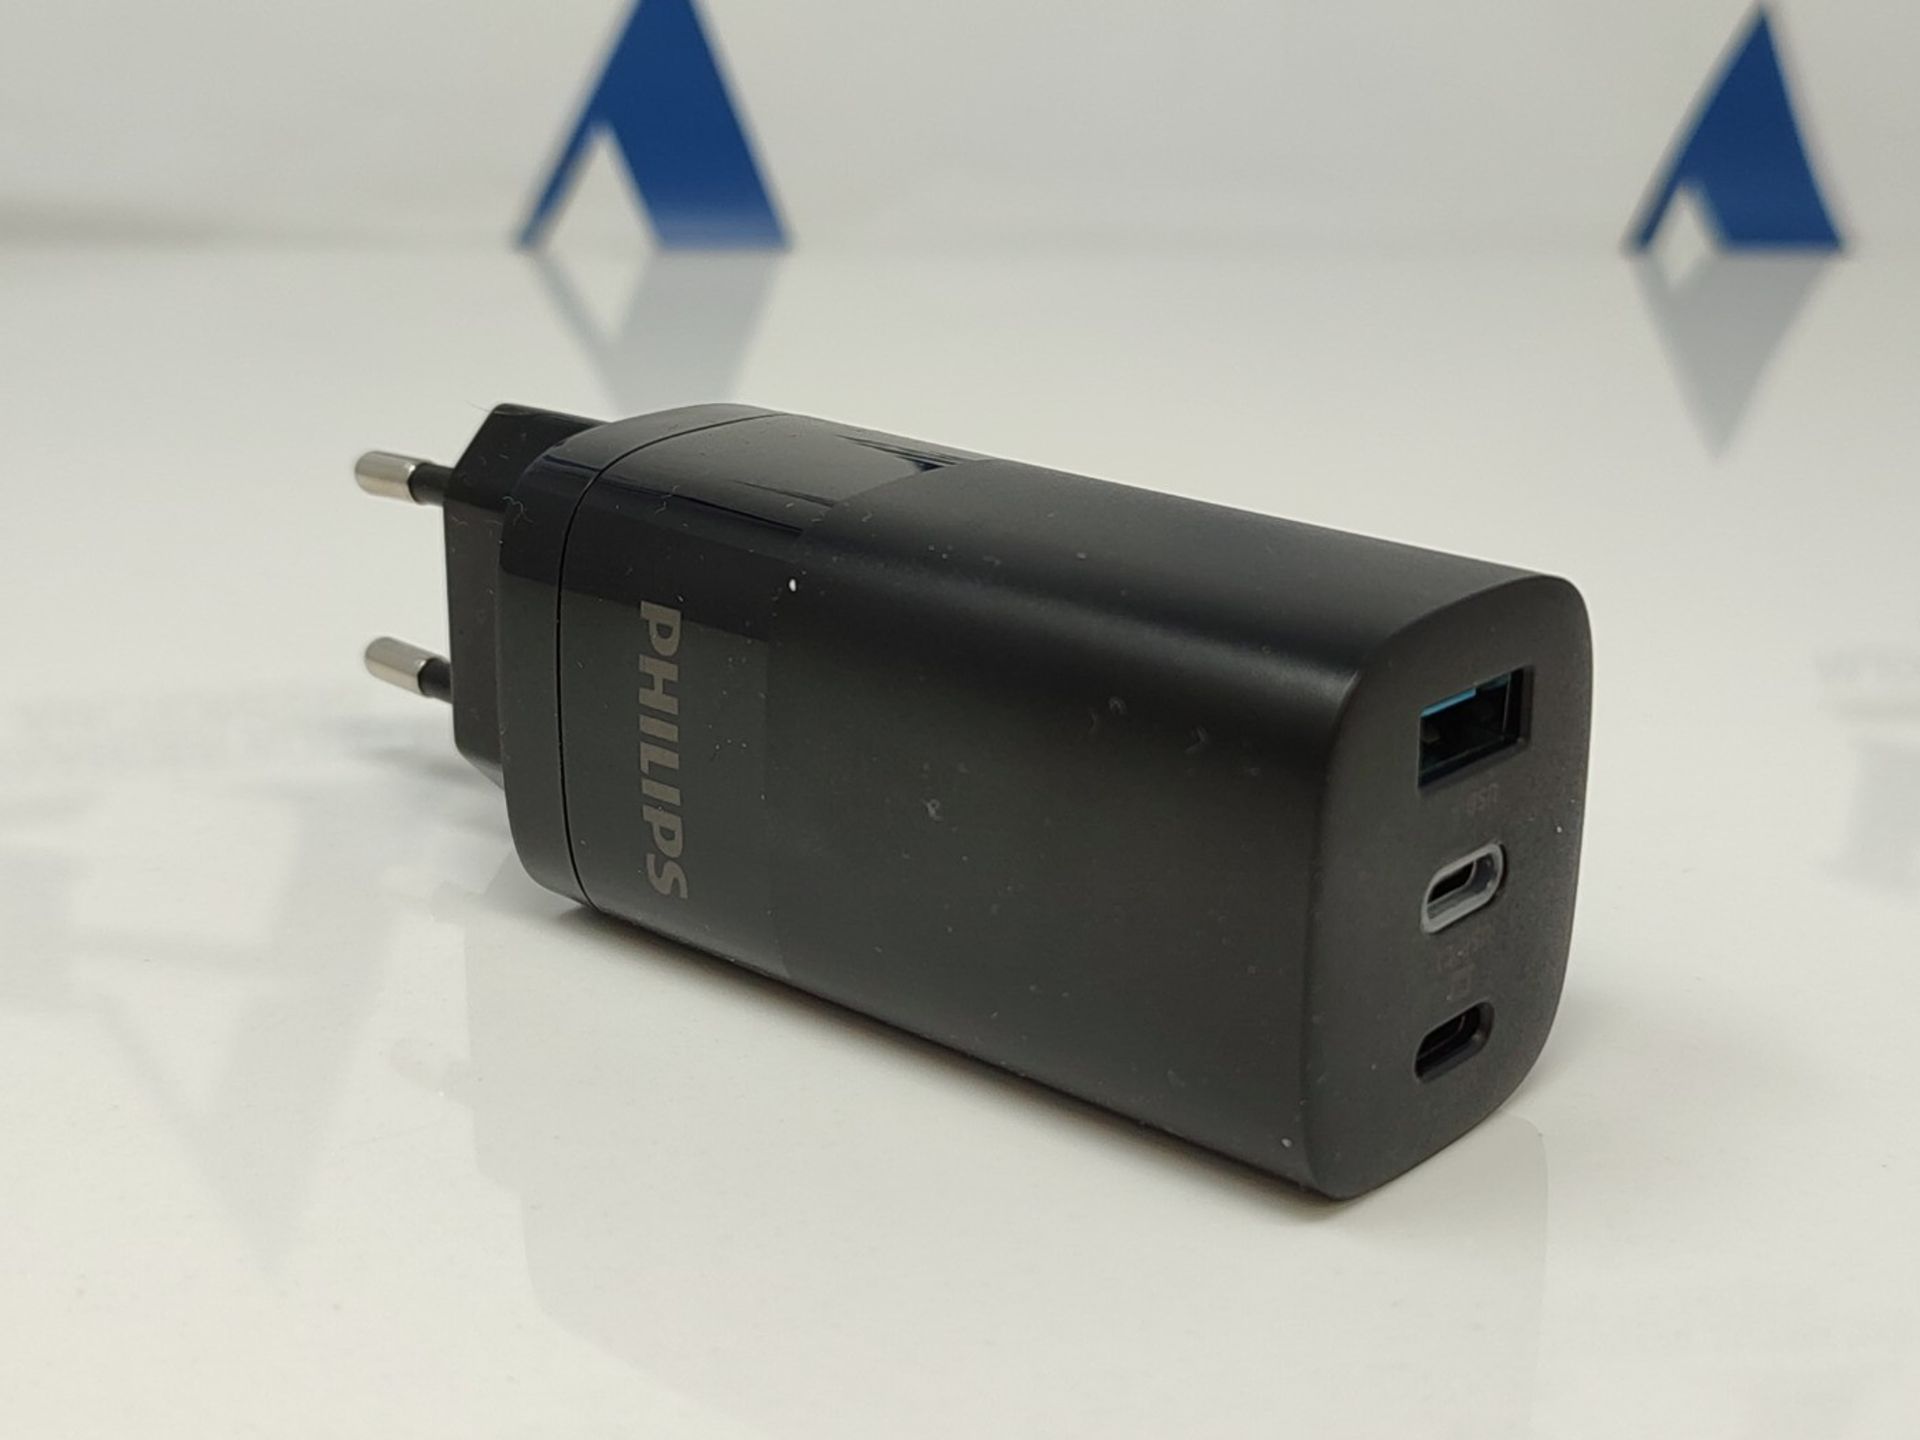 PHILIPS DLP2681/12 - Charger with 65W output power - USB-A and USB-C dual output - Bla - Image 3 of 6